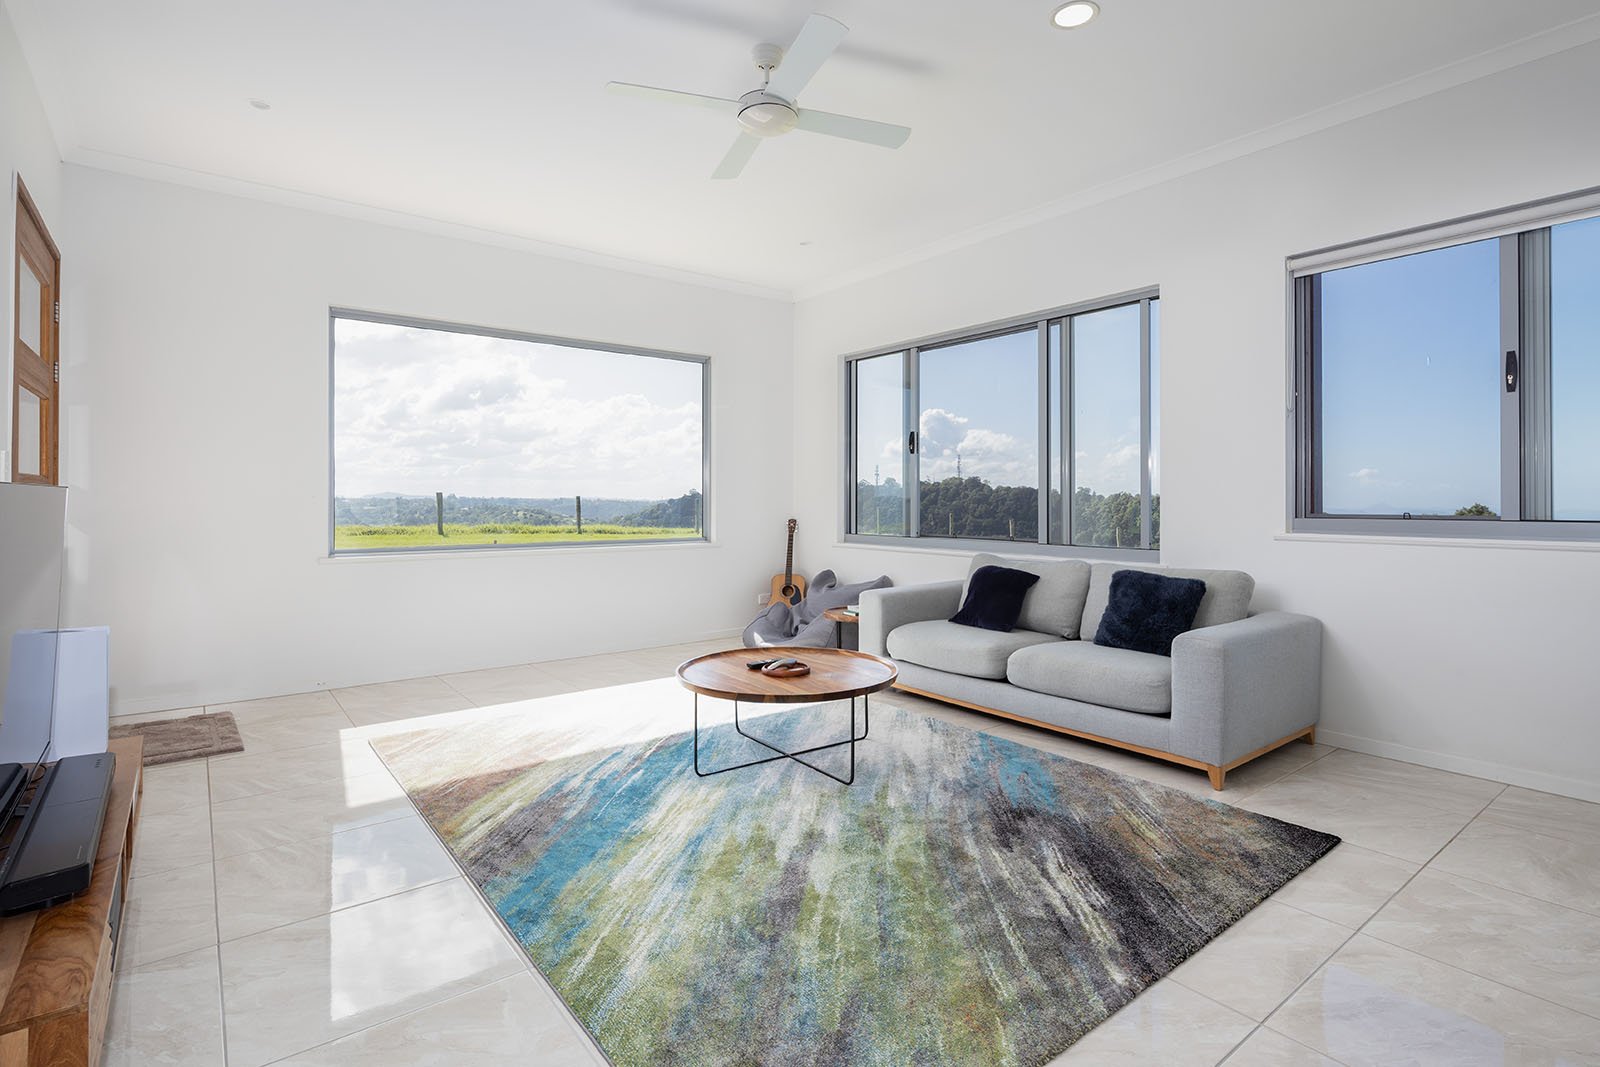 Petrichor Estate's modern living room with stunning mountain views. Ideal for a relaxing Sunshine Coast getaway